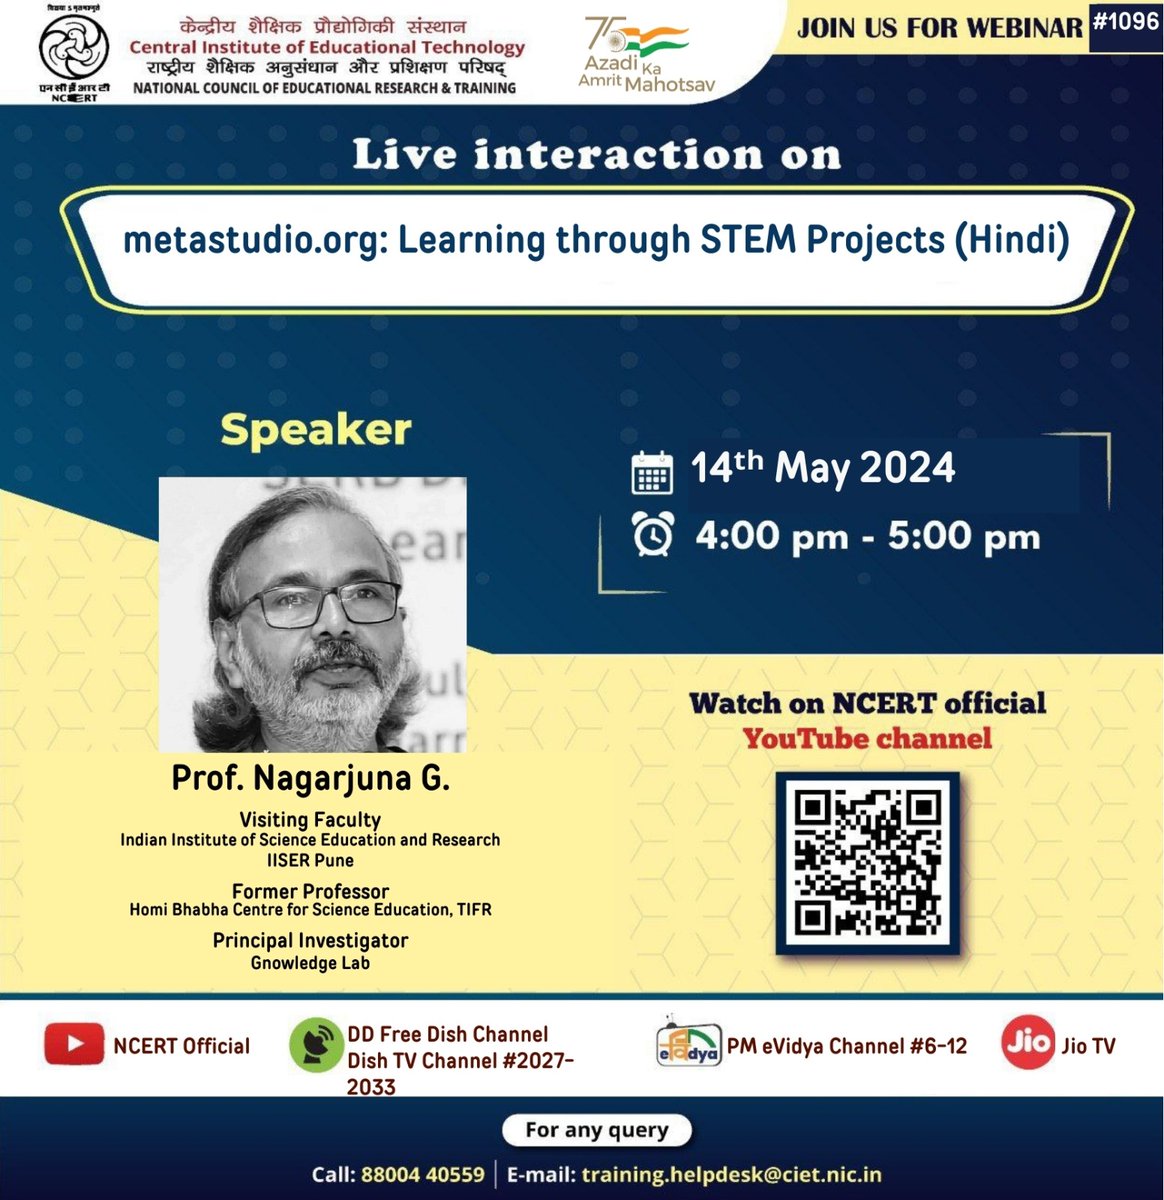 Join us for the webinar 'metastudio.org: Learning through STEM Projects' (Hindi) on 14ᵗʰ May 2024, from 4:00-5:00 pm. For more information, visit: ciet.ncert.gov.in/webinar For any query, write to us @ training.helpdesk@ciet.nic.in or call #8800440559. #STEMeducation